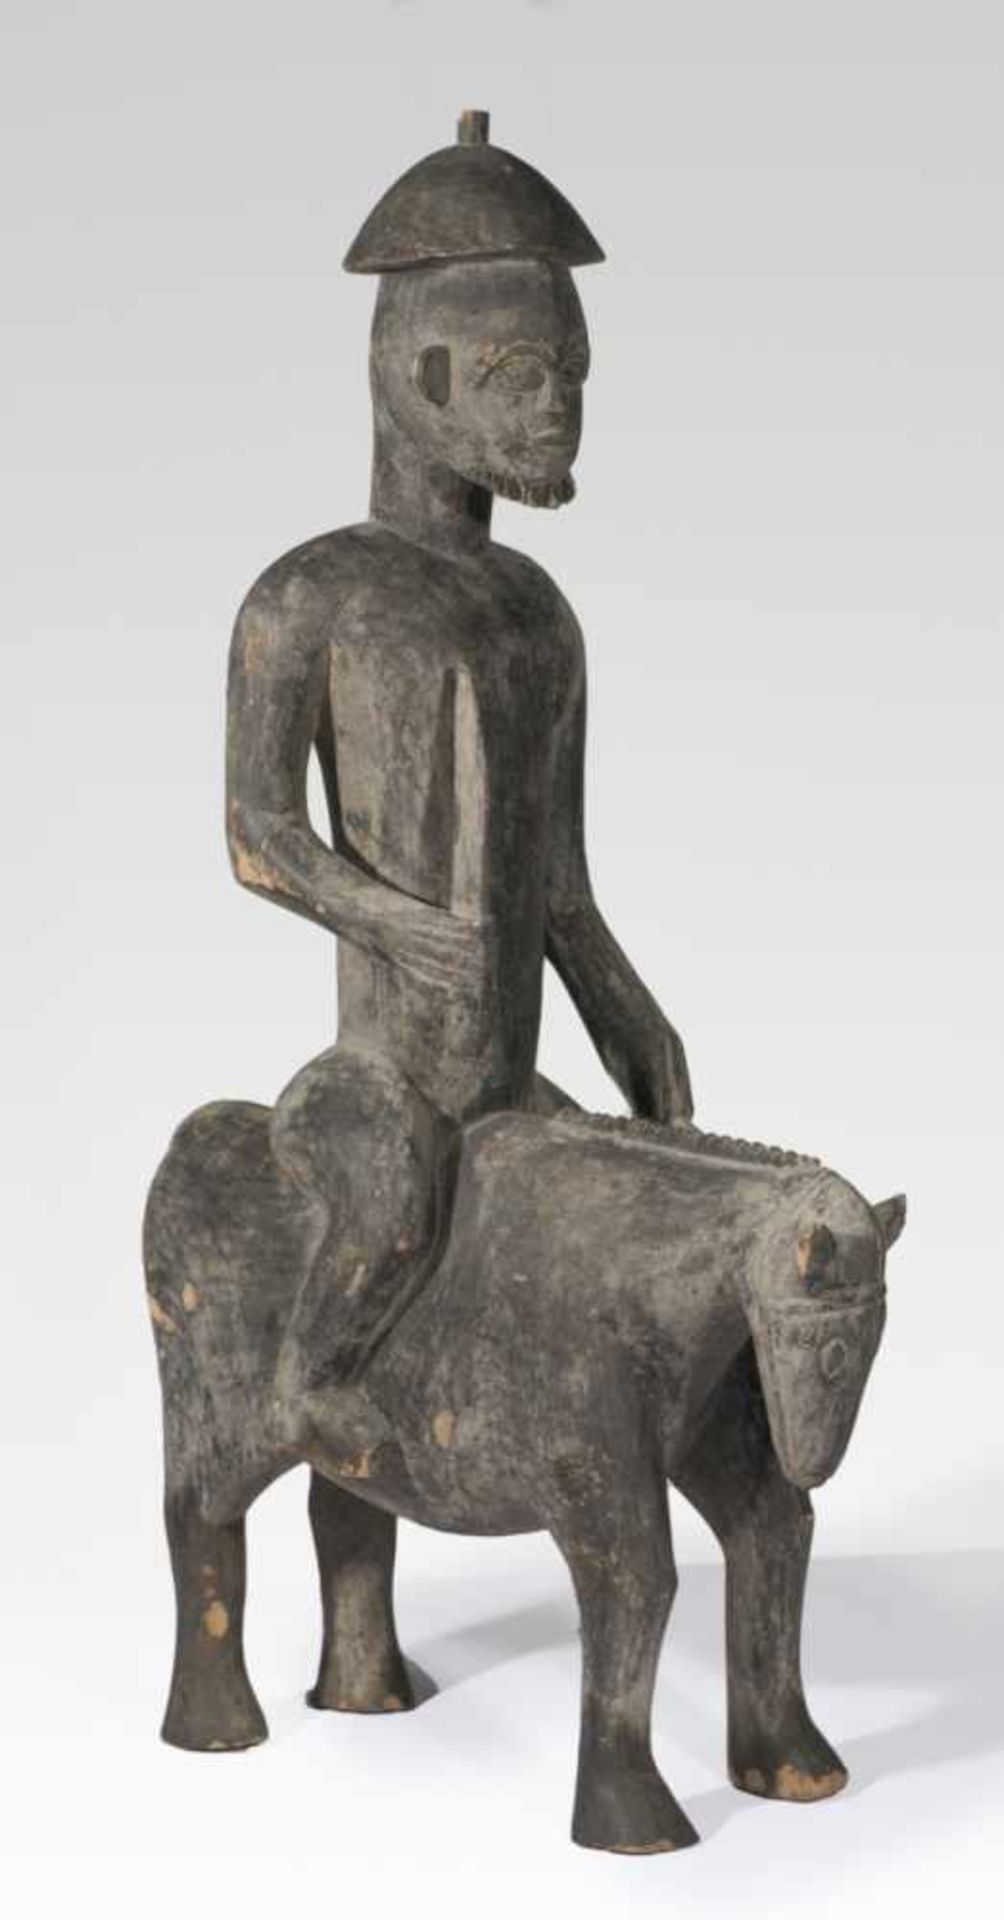 Very large equestrian figure of a village policeman, Africa, wood carving, 20th c., 93 x